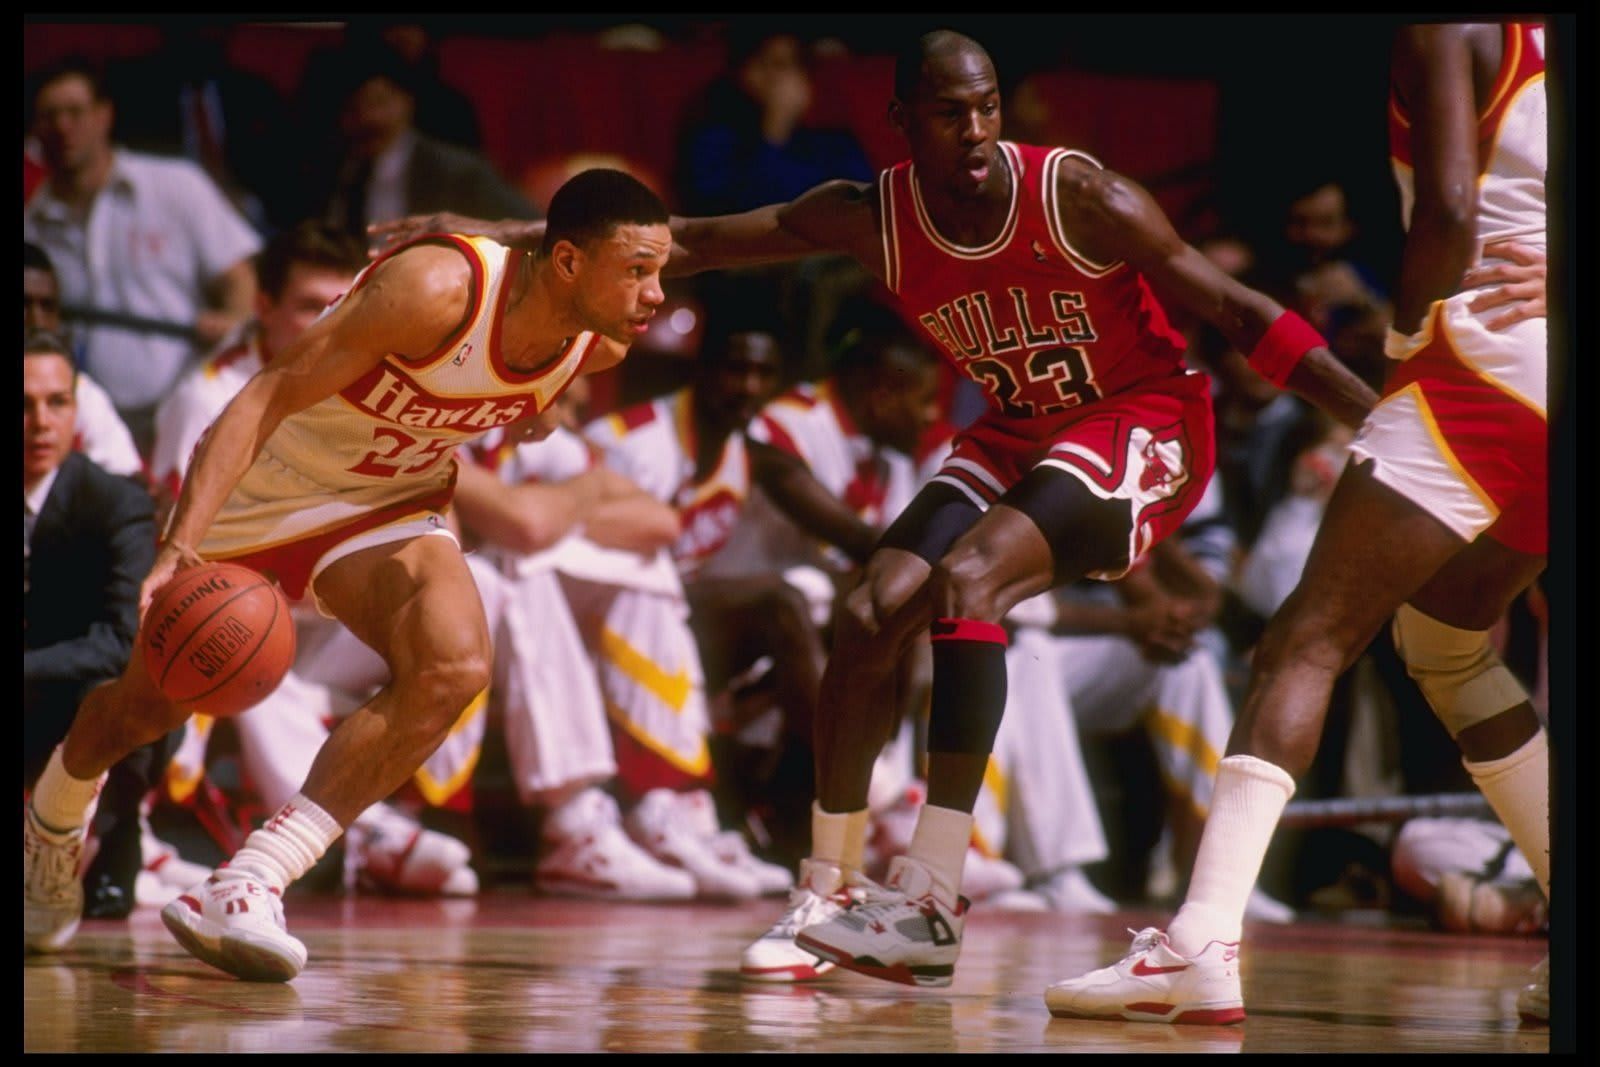 Michael Jordan dropped 61 points against Dominique Wilkins and the Atlanta Hawks on April 16, 1987 [Photo: Soaring Down South]